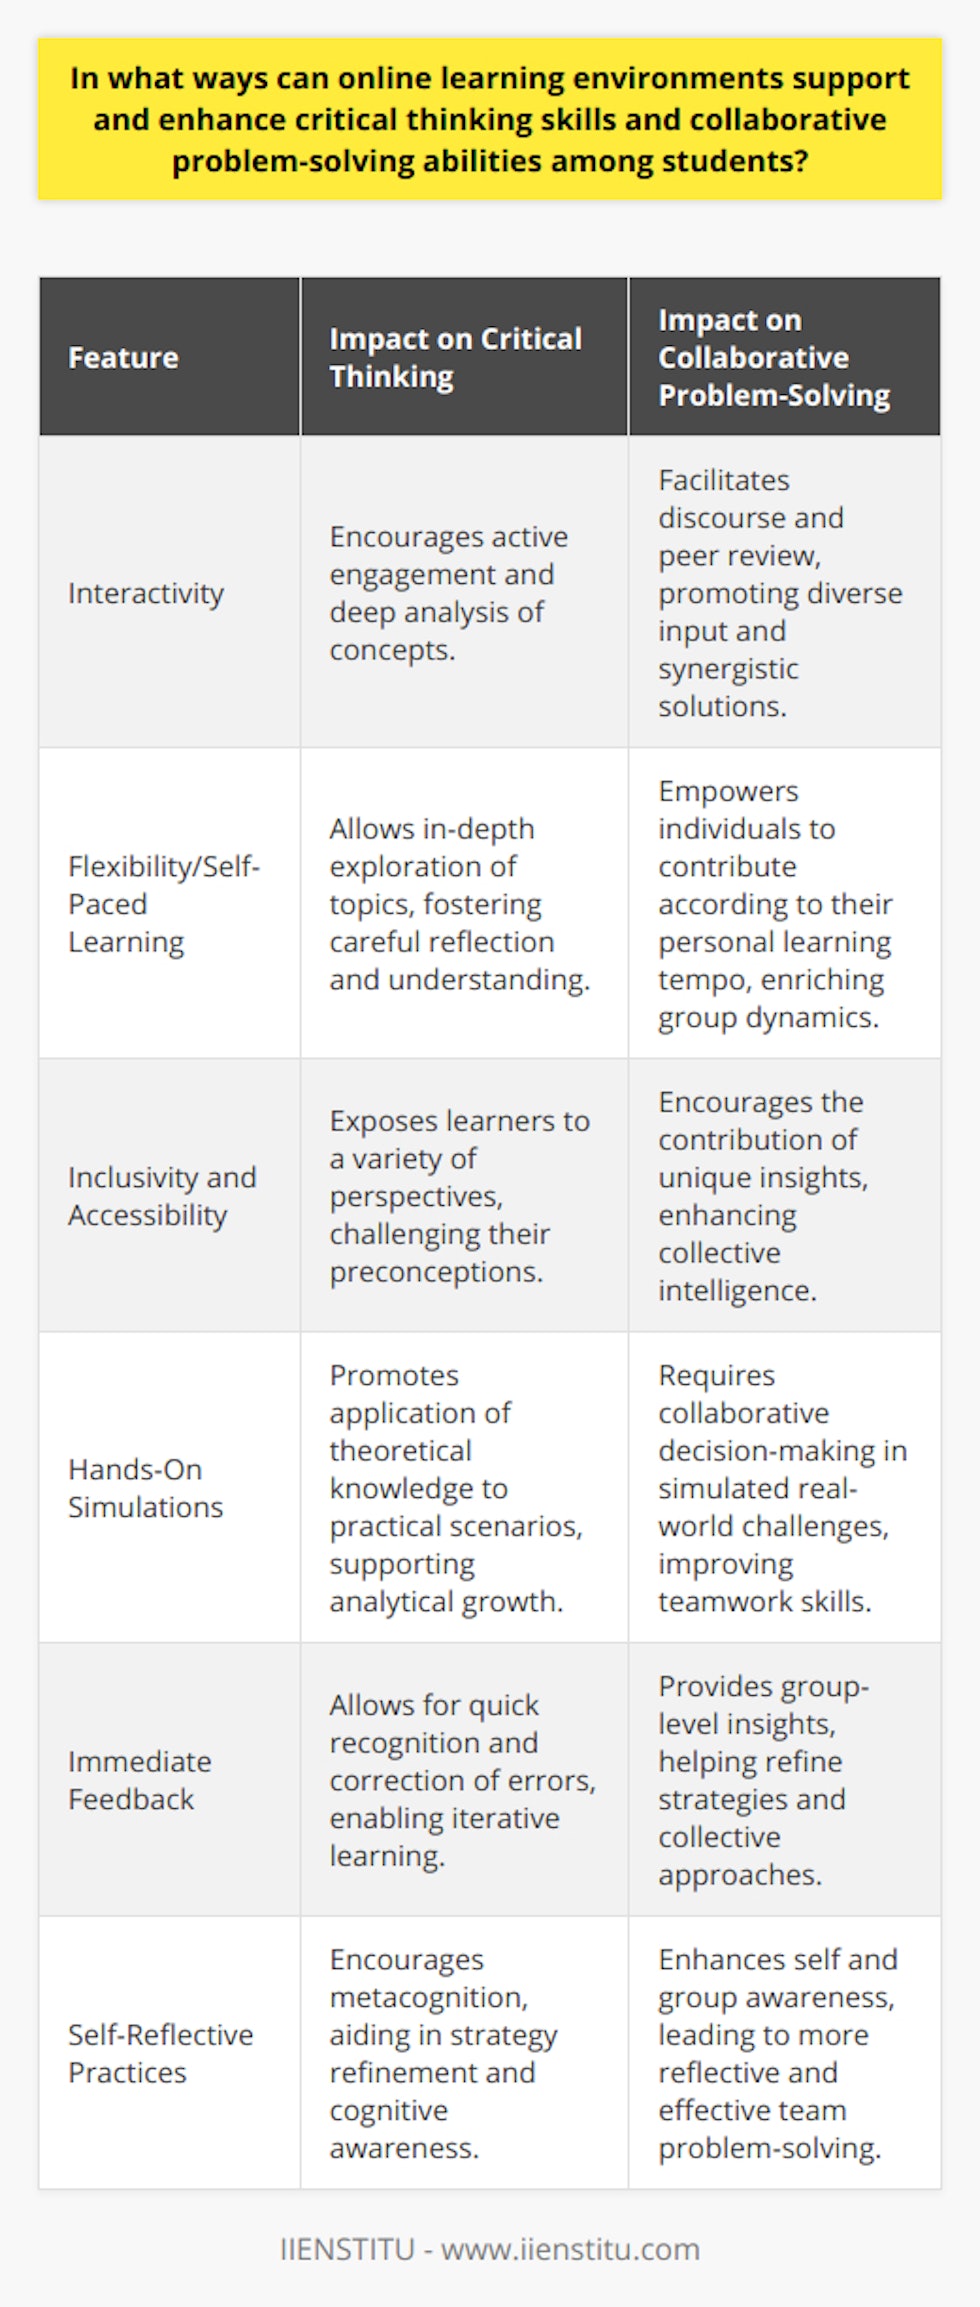 Online learning environments are increasingly recognized for their potential in nurturing critical thinking skills and collaborative problem-solving abilities among students. These virtual platforms offer a unique combination of resources, tools, and methodologies that contribute to the development of these essential competencies.Interactivity, a cornerstone of these environments, encourages users to actively participate in the learning process. Instead of passive absorption of information, students engage in thought-provoking discourse, facilitated by online forums, chats, and peer reviews. These interactive modes push students beyond rote learning, challenging them to question assumptions, dissect arguments, and delve deeper into subjects, ultimately enhancing their capacity for critical analysis.Crucially, online platforms afford a level of flexibility atypical of traditional classrooms. Students are empowered to learn at their own rhythm, making room for more in-depth exploration of complex topics. This self-paced learning helps to cultivate an introspective and meticulous approach, as learners take the necessary time to ponder over concepts and connect the dots comprehensively, fostering their capacity for critical thinking.The collaborative aspect of online learning environments is greatly enhanced by their inclusivity and accessibility. They bring together students from a variety of socio-economic, cultural, and geographical backgrounds to collaborate on projects, debates, and discussions. This amalgamation of diverse perspectives can introduce learners to alternative ways of thinking and solving problems, broadening their cognitive horizons and enriching the collaborative experience.Hands-on simulations and scenarios are offered as part of the practical component of online learning. Students may find themselves in the midst of virtual case studies, interactive labs, and simulations that require them to apply theoretical knowledge to real-world problems. By navigating these applied practice opportunities, students develop a practical understanding of problem-solving that goes well beyond theoretical knowledge.Another noteworthy feature of online learning is the provision of immediate and detailed feedback. Digital platforms equipped with smart assessment tools provide timely responses to students' submissions, which is instrumental in fostering an iterative learning process. Prompt feedback allows students to recognize and correct errors quickly, reinforcing learning and improving their problem-solving tactics.Furthermore, online learning encourages a metacognitive approach by incorporating self-reflective practices into the curriculum. Through activities like learning diaries or self-evaluation questionnaires, students are prompted to contemplate their learning strategies and cognitive approaches. This reflection lays the groundwork for improving problem-solving strategies, as students become more aware of their thought processes and are better positioned to fine-tune them.To summarize, the efficacy of online learning environments in developing critical thinking and collaborative problem-solving skills is tied to their interactive, flexible, and diverse nature. Coupled with opportunities for applied practice and immediate feedback, as well as fostering self-awareness, these platforms are well-positioned to prep students not just academically, but also cognitively for the challenges of the modern world.